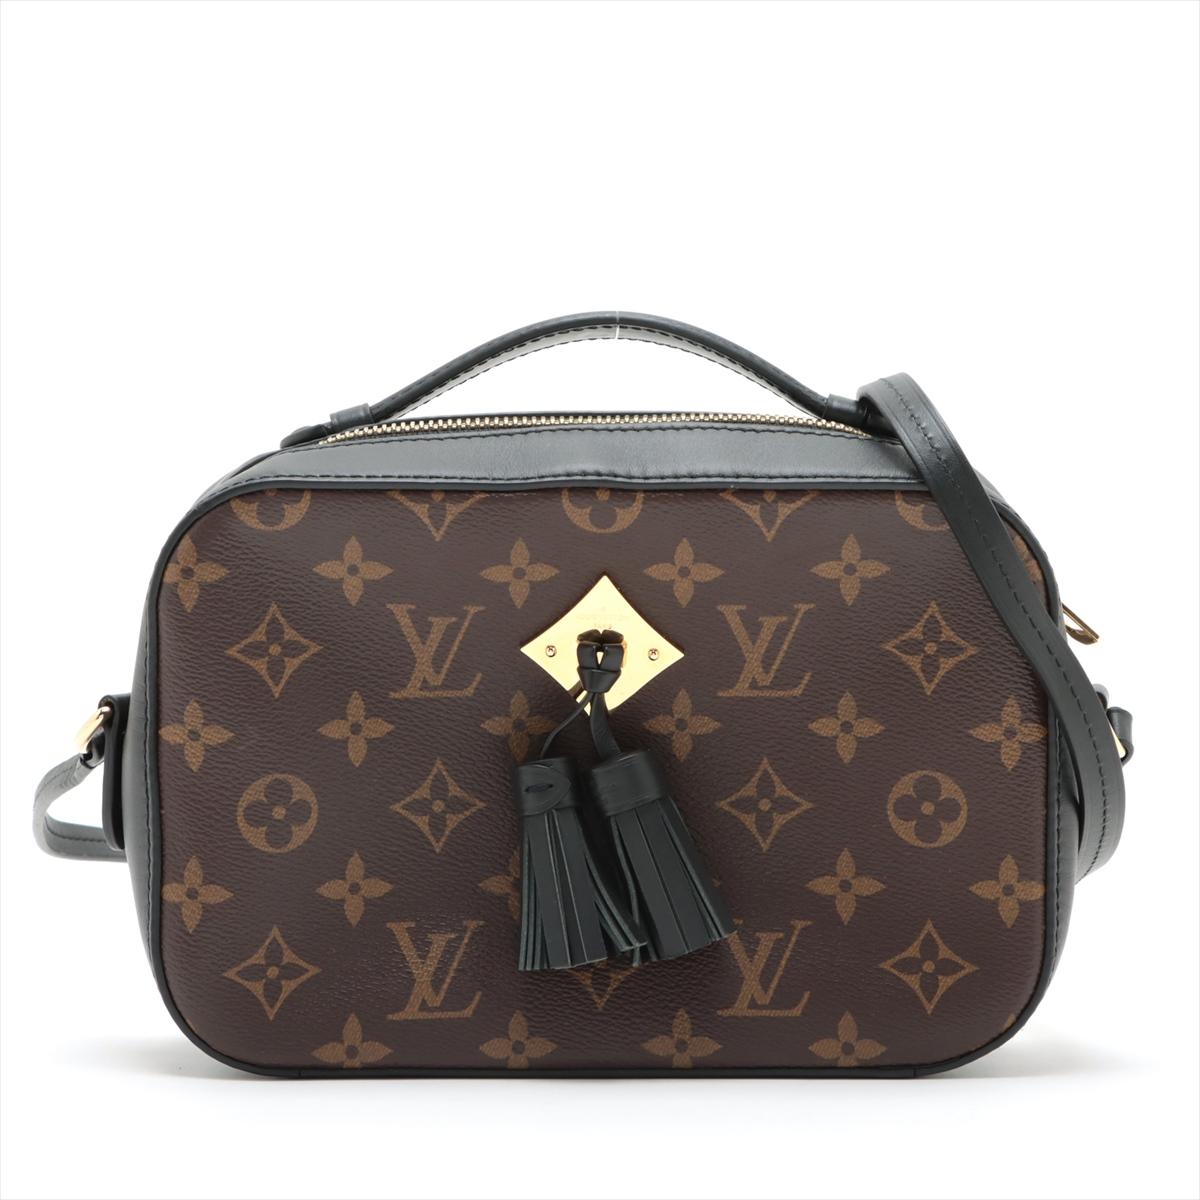 The Louis Vuitton Monogram Saintonge is a stylish and compact crossbody bag that showcases the brand's iconic Monogram canvas, reflecting a timeless and sophisticated aesthetic. The bag features the instantly recognizable LV monogram pattern,